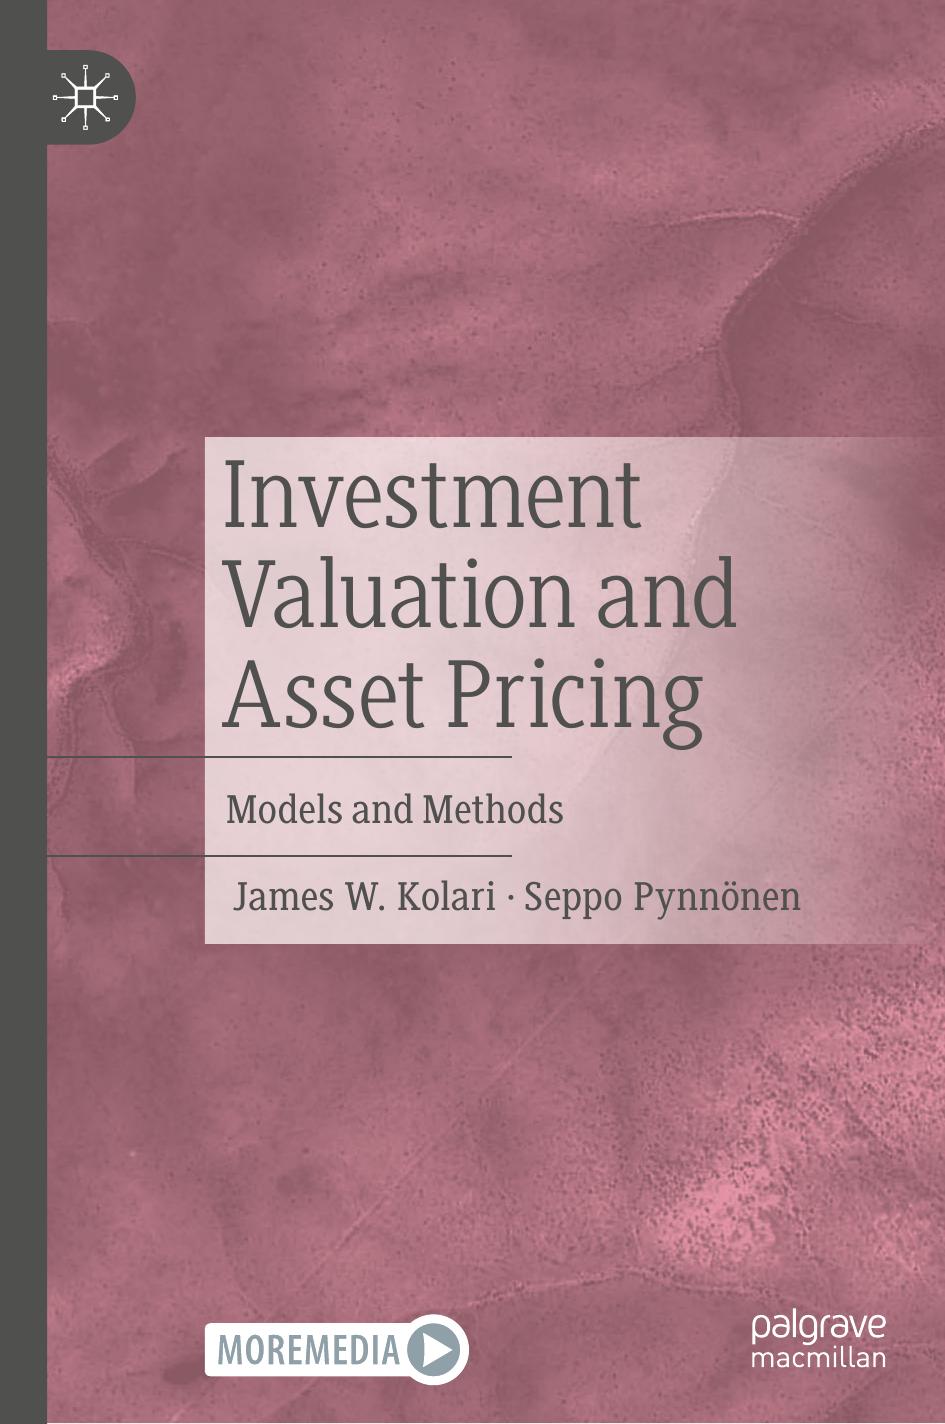 Investment Valuation and Asset Pricing: Models and Methods by James W. Kolari Seppo Pynnönen